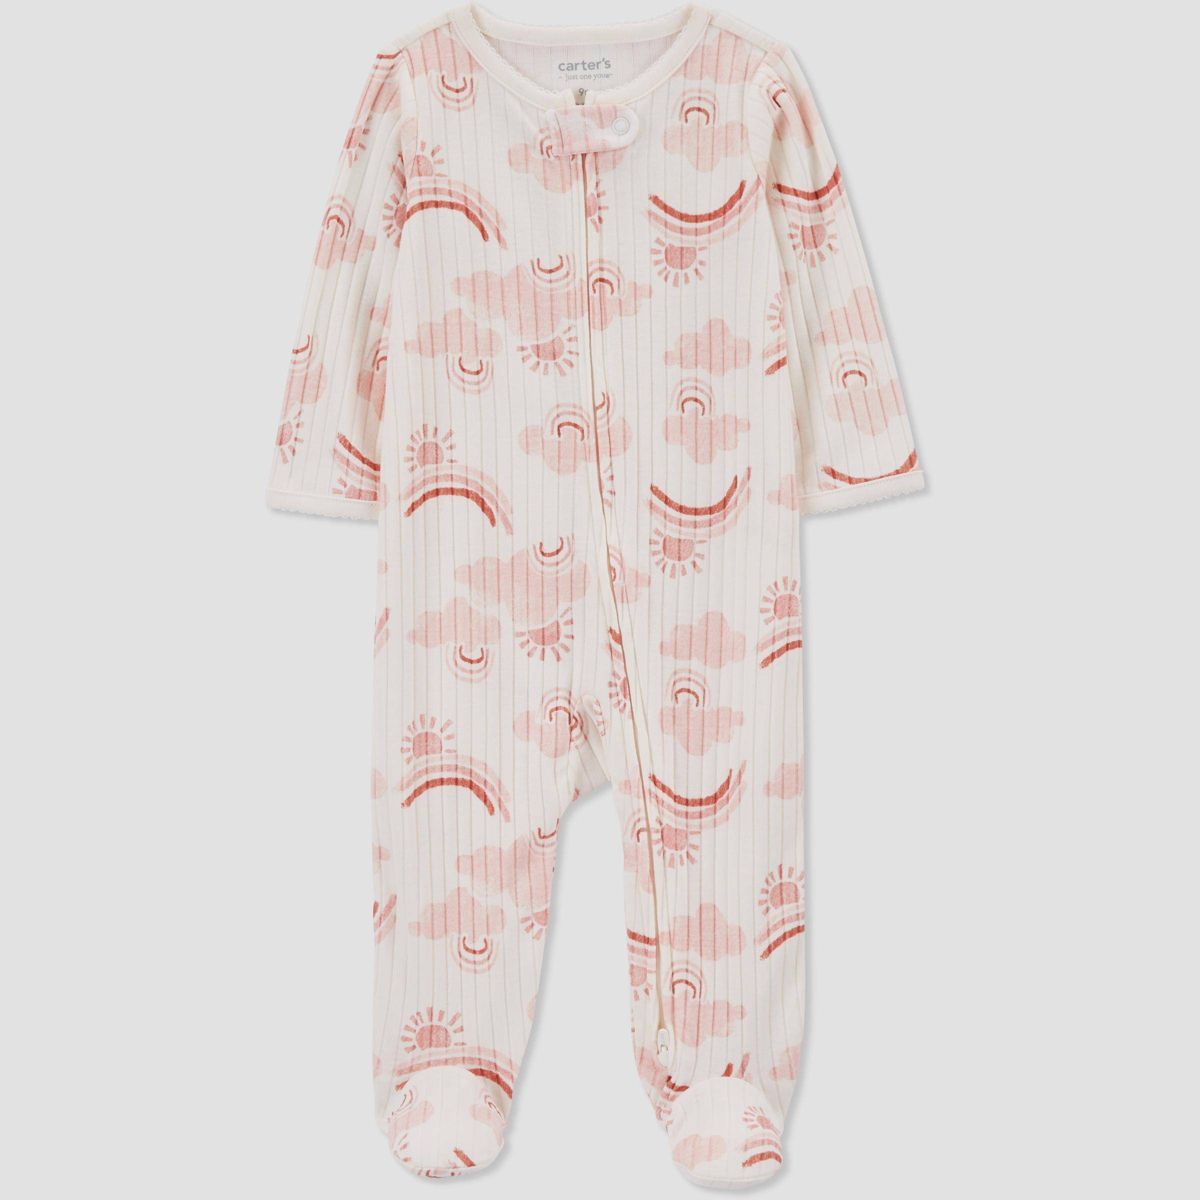 Carter's Just One You®️ Baby Girls' Rainbow Footed Pajama - White/Pink | Target